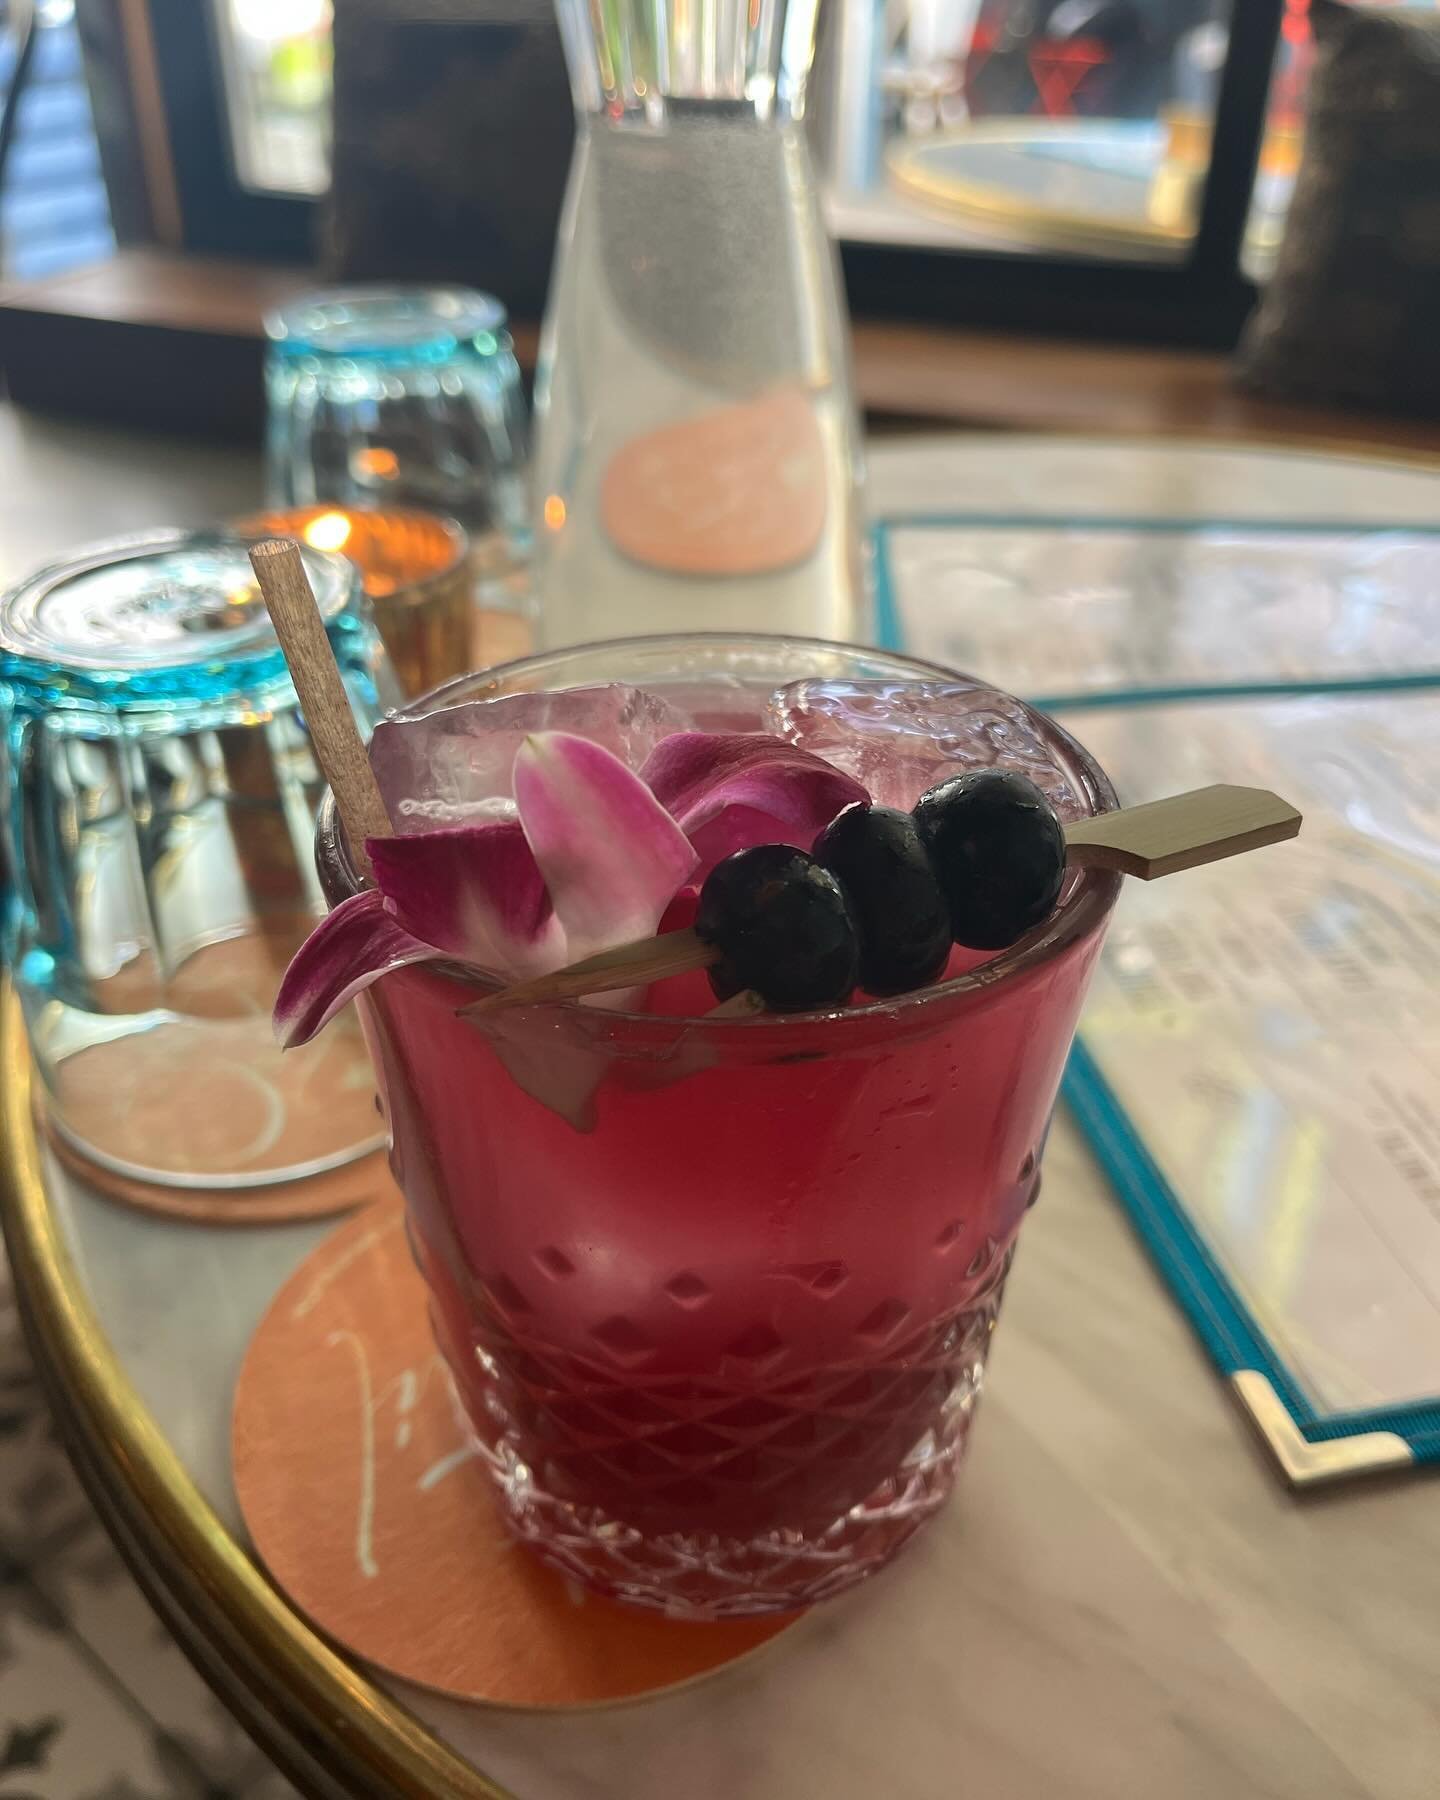 Have you tried our spirit-free drinks? We always have plenty of mock-tails on our menu! 
.
.
Berry Pineapple Express&hellip;. Cruise control&hellip; phony mezcal Negroni.. just to name a few🍸